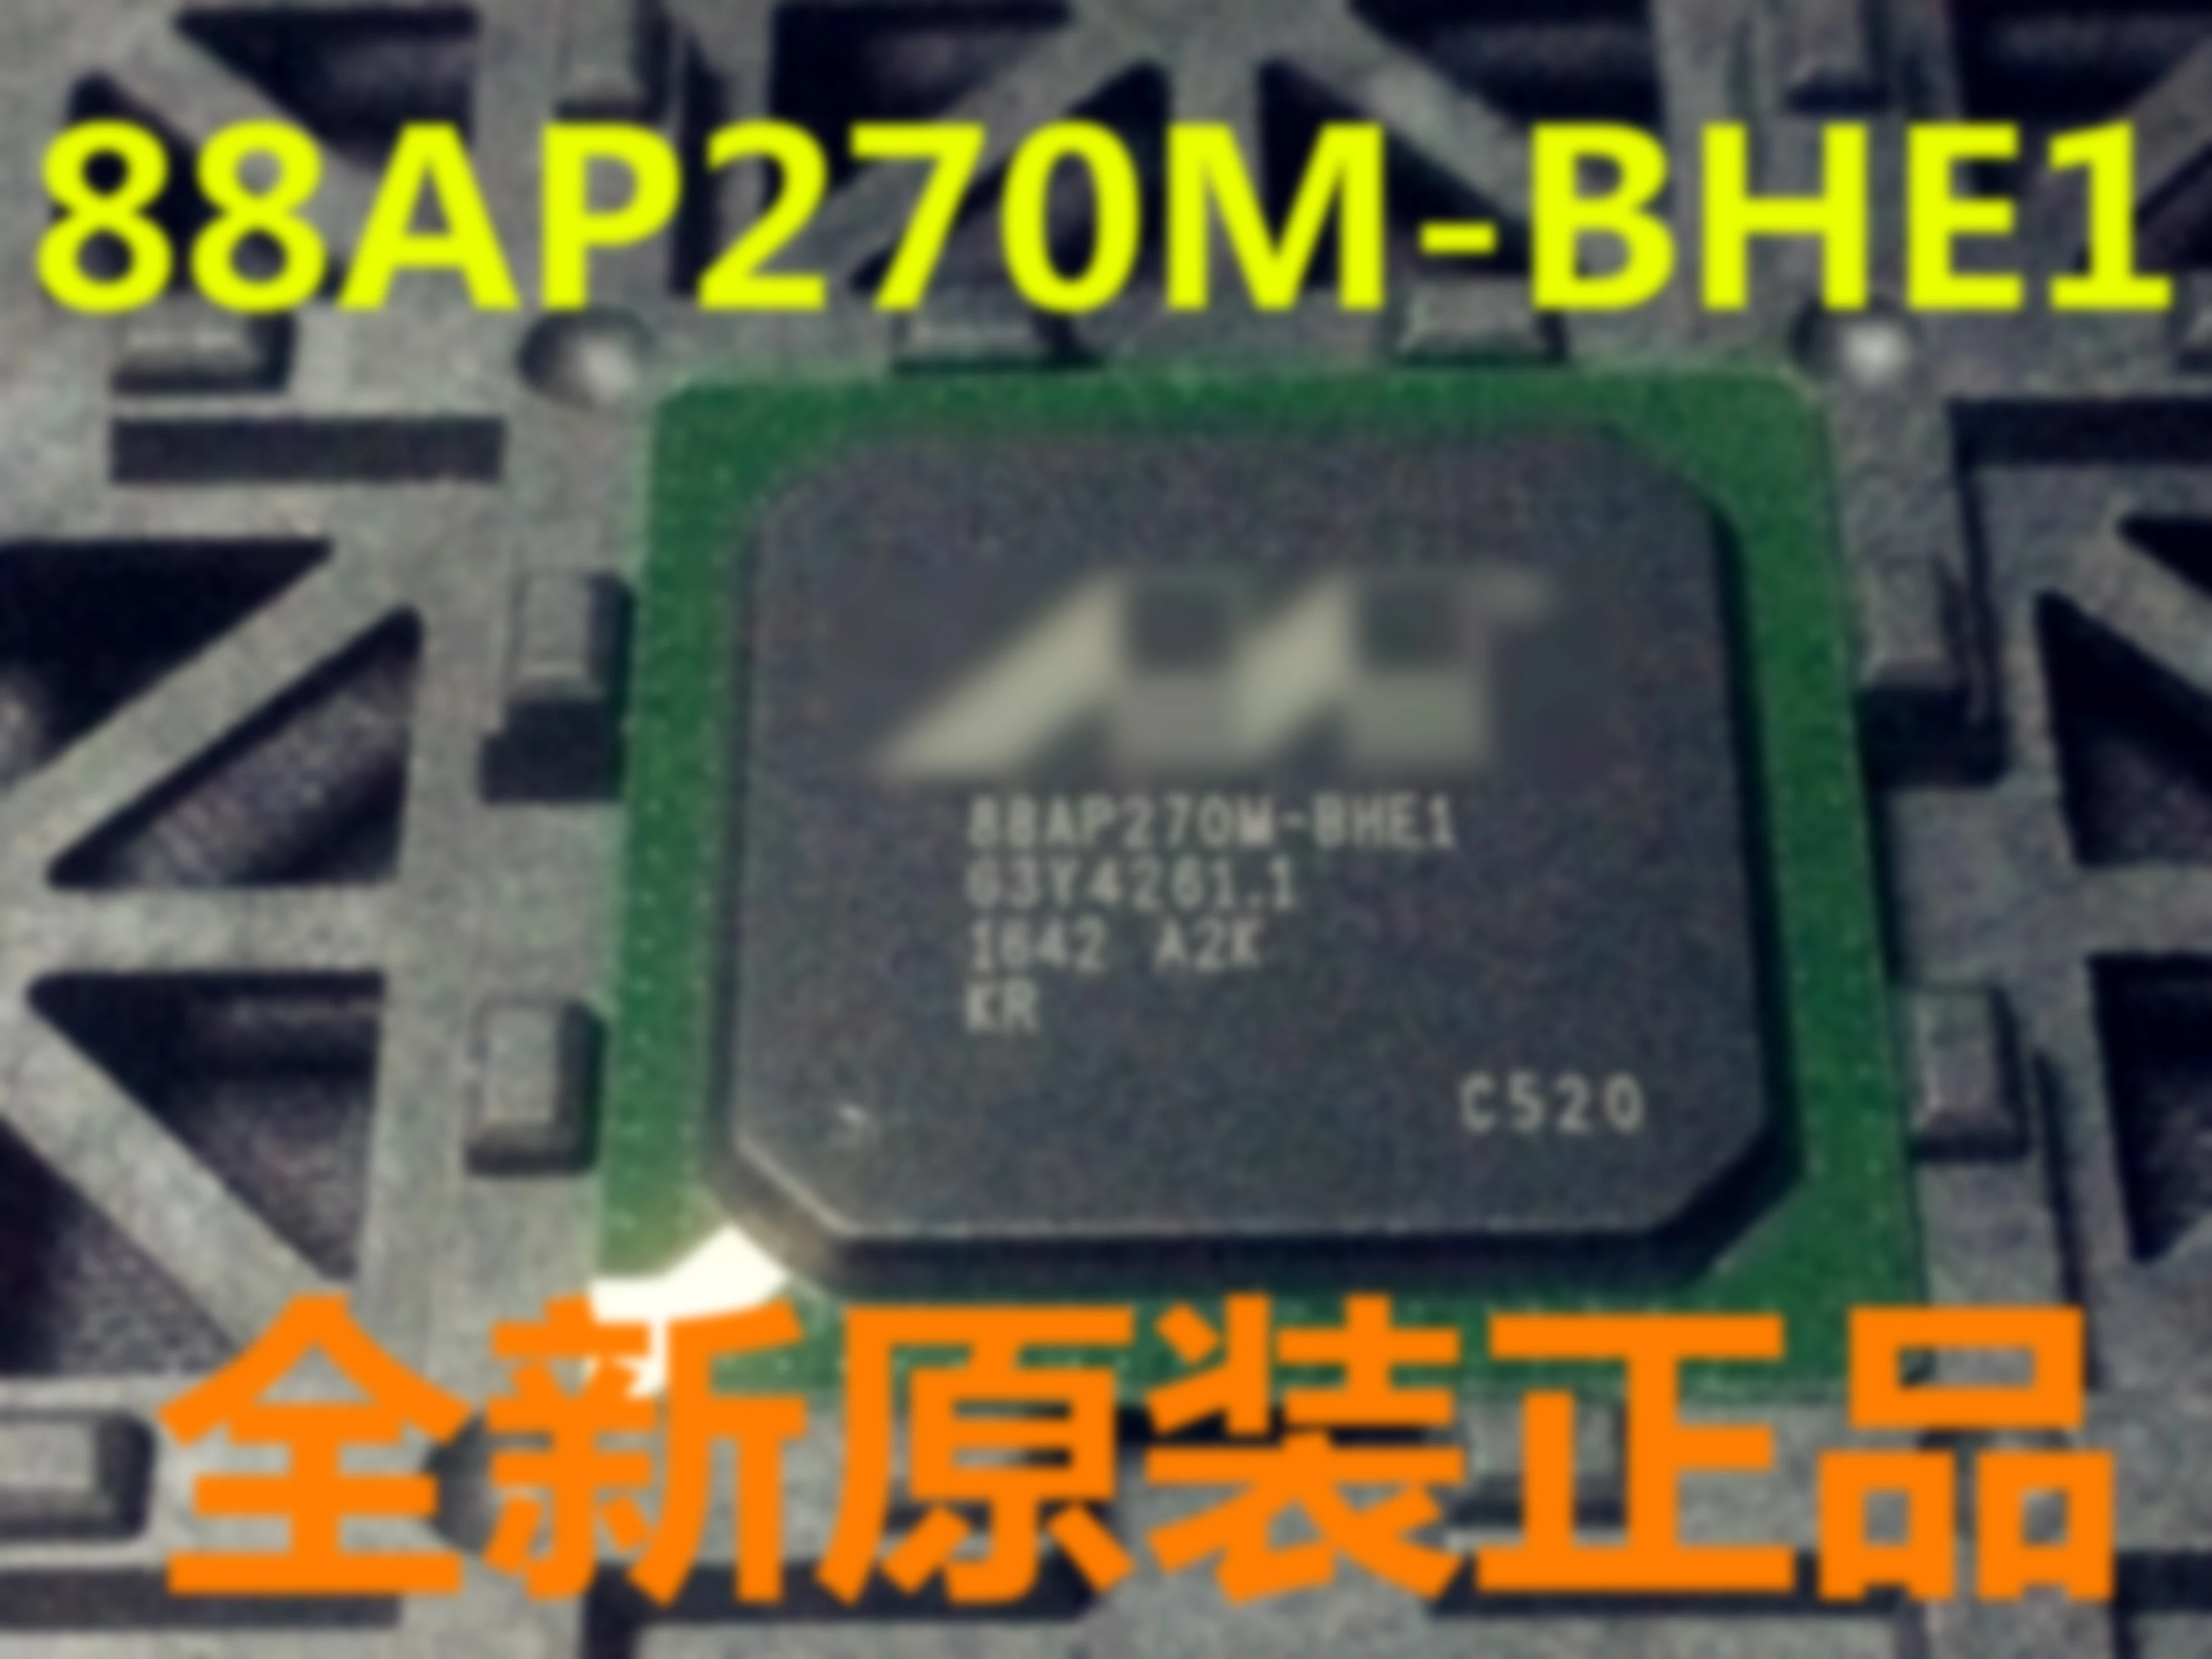 1PCS/lot 88AP270M-BHE1 88AP270M BHE1 BGA  100% new imported original     IC Chips fast delivery